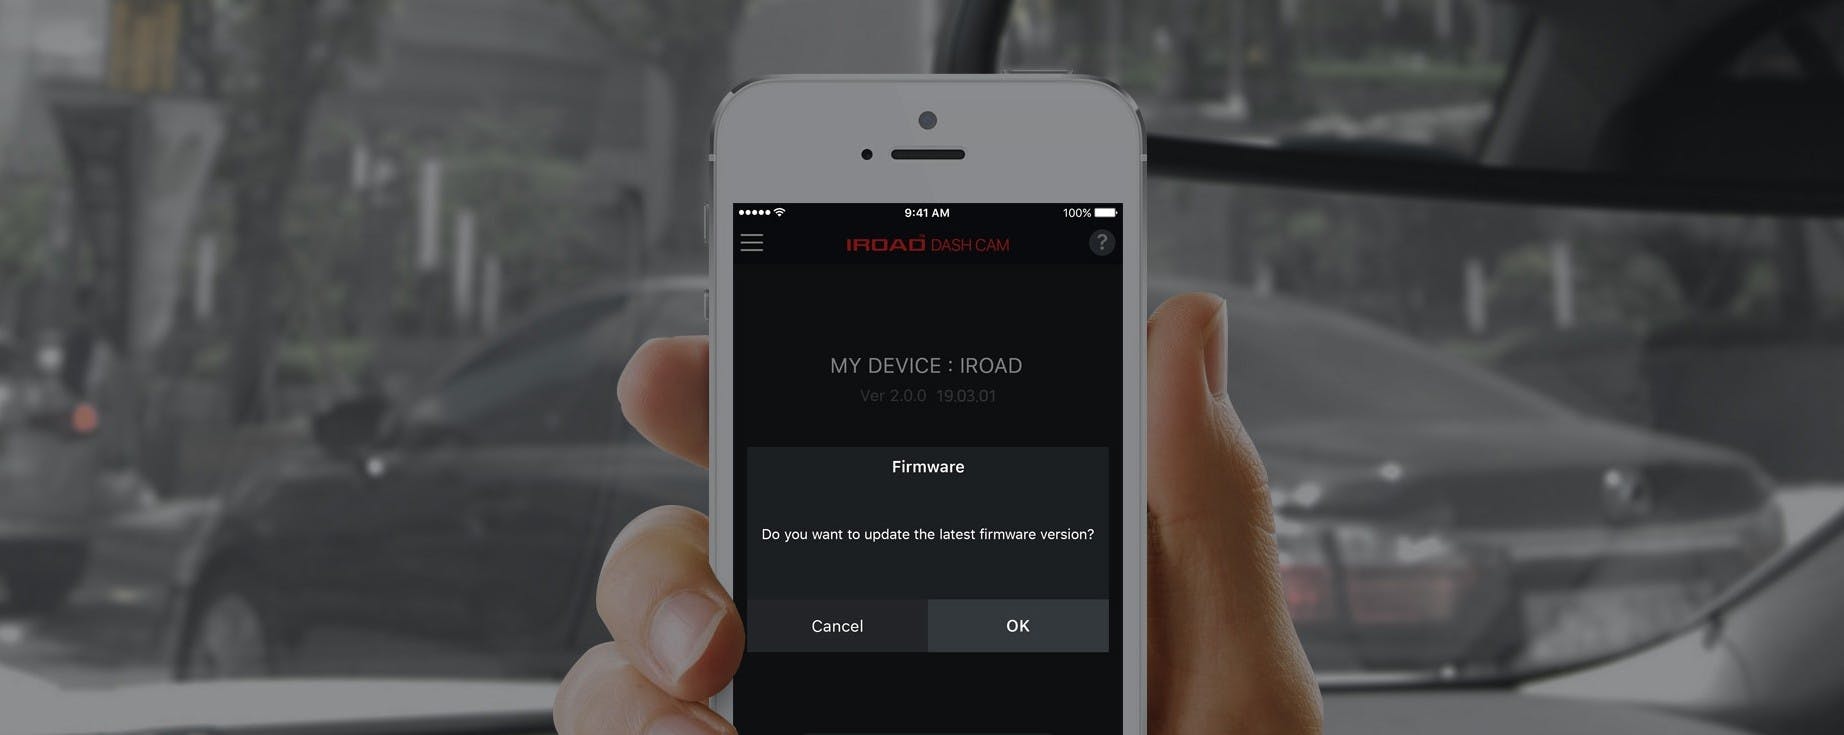 Iroad App is available on mobile